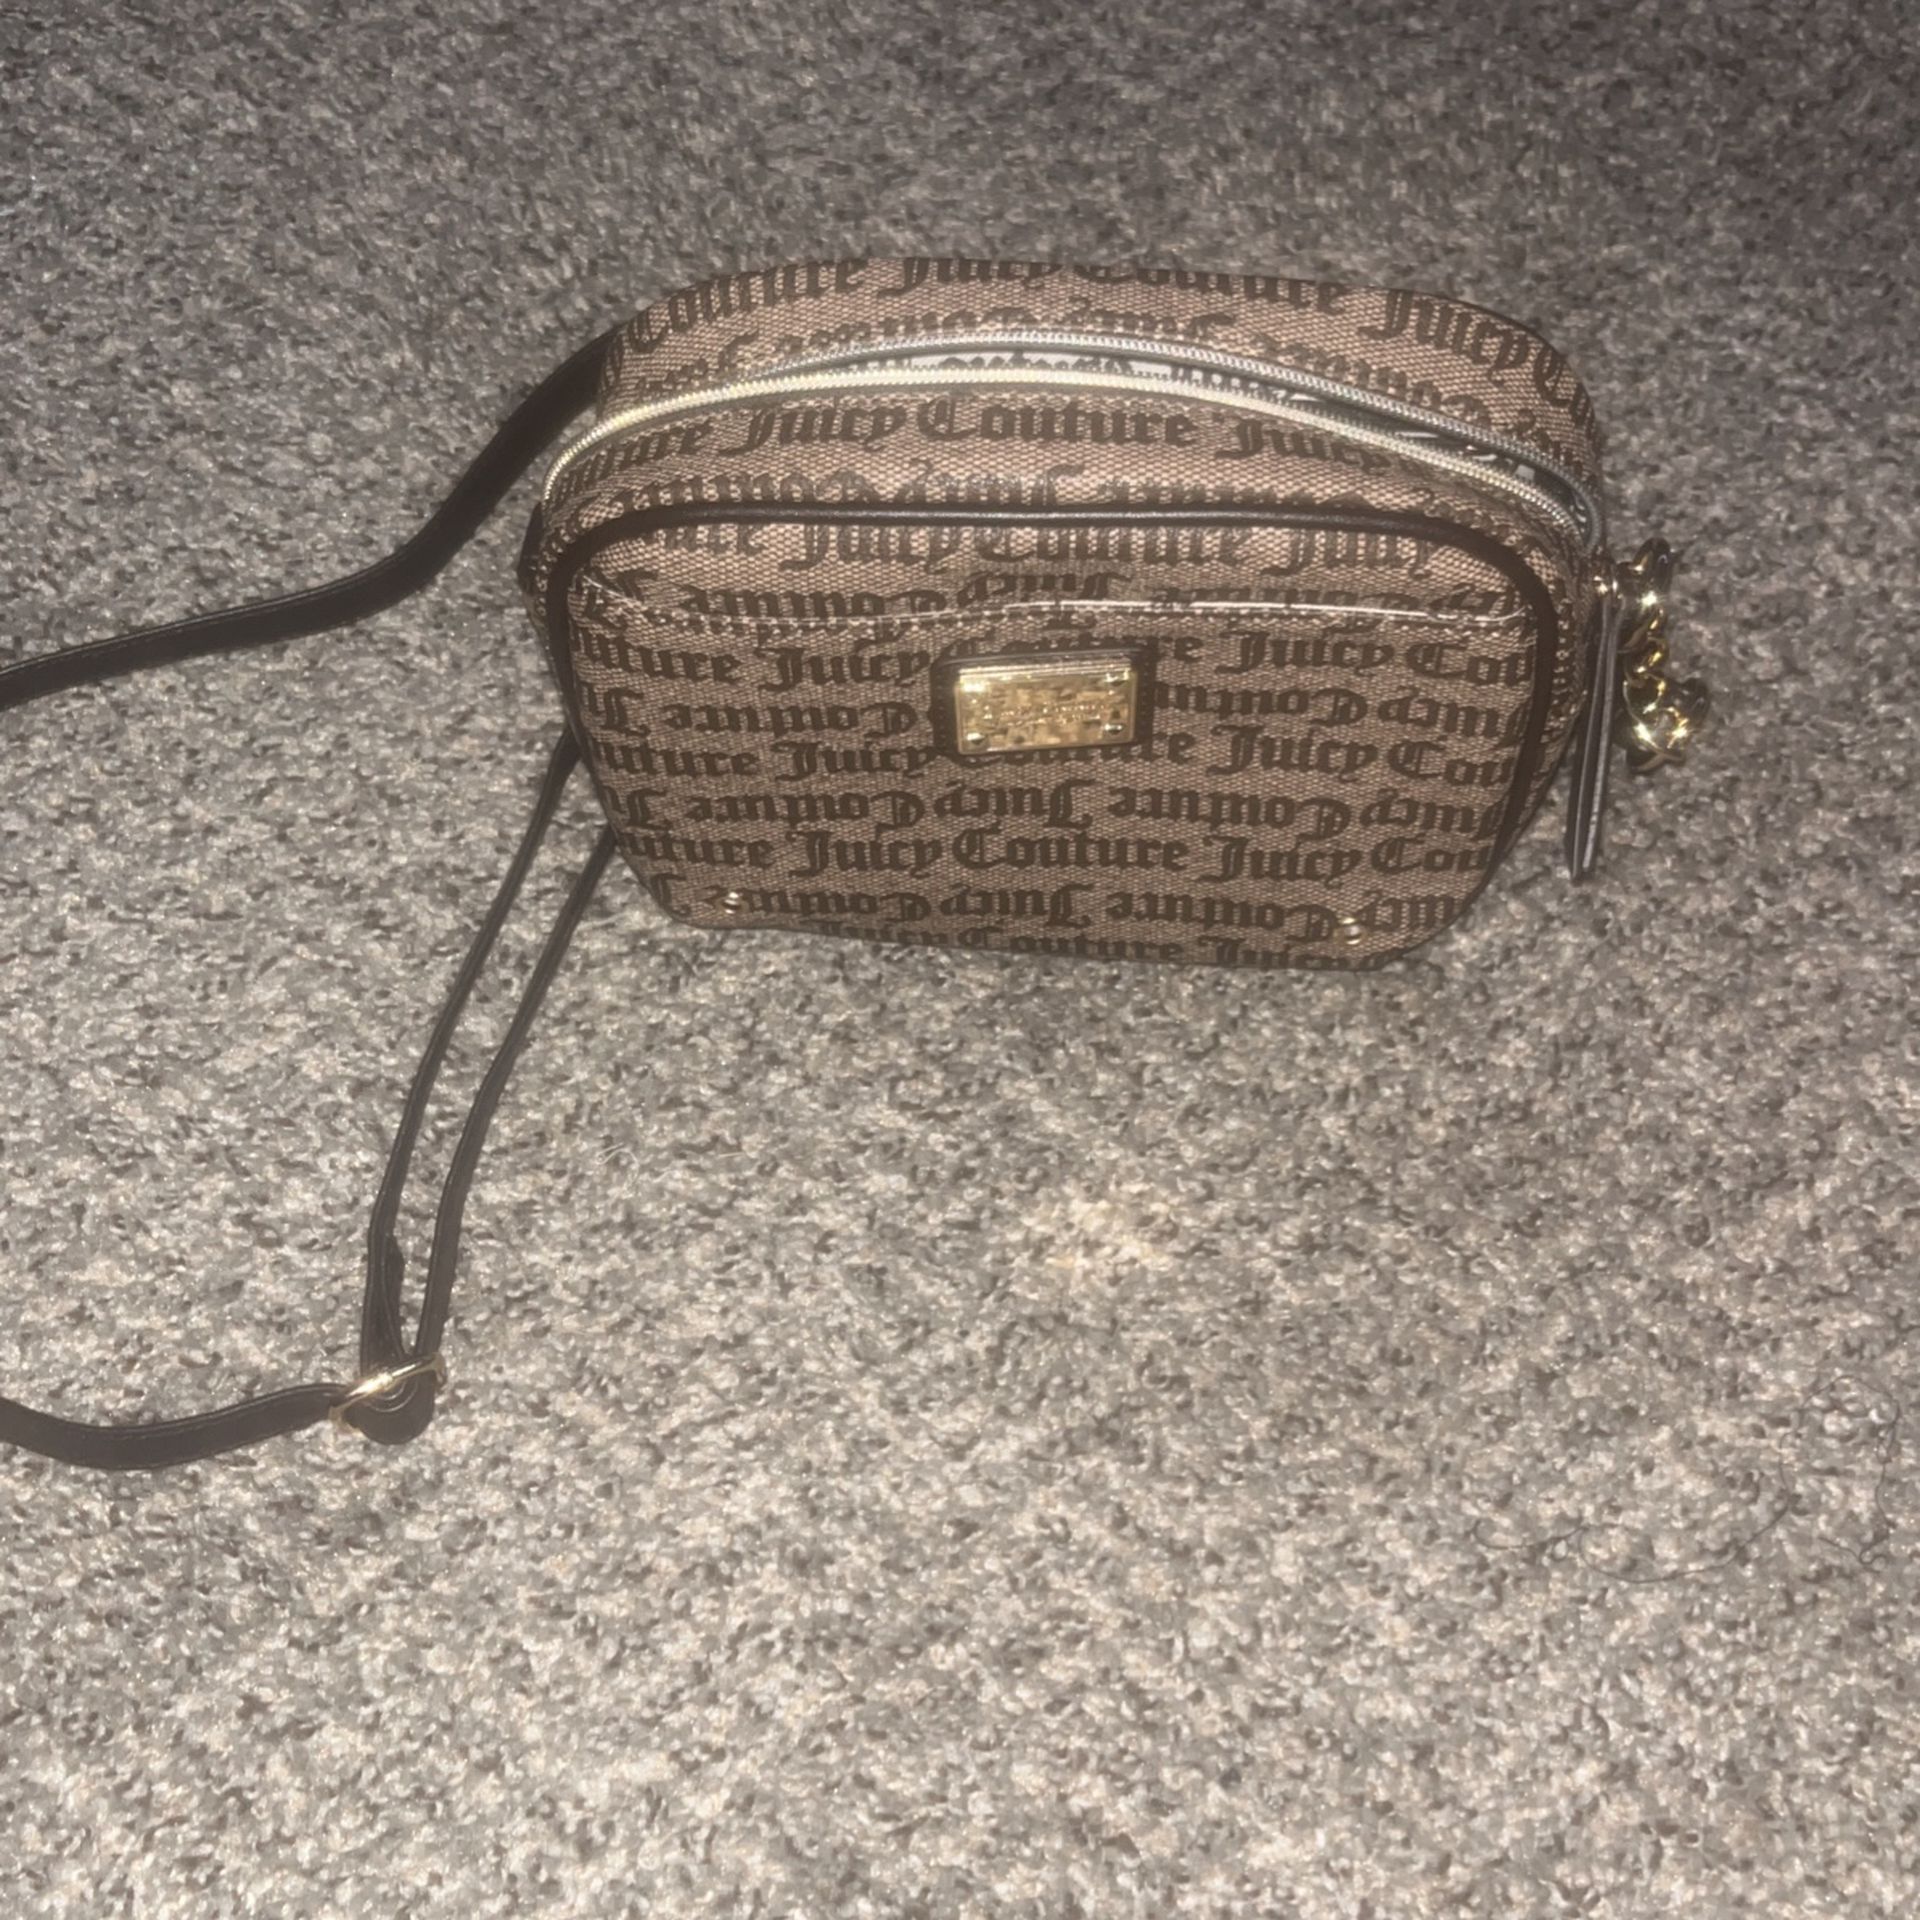 Juicy Couture Cross Body Purse